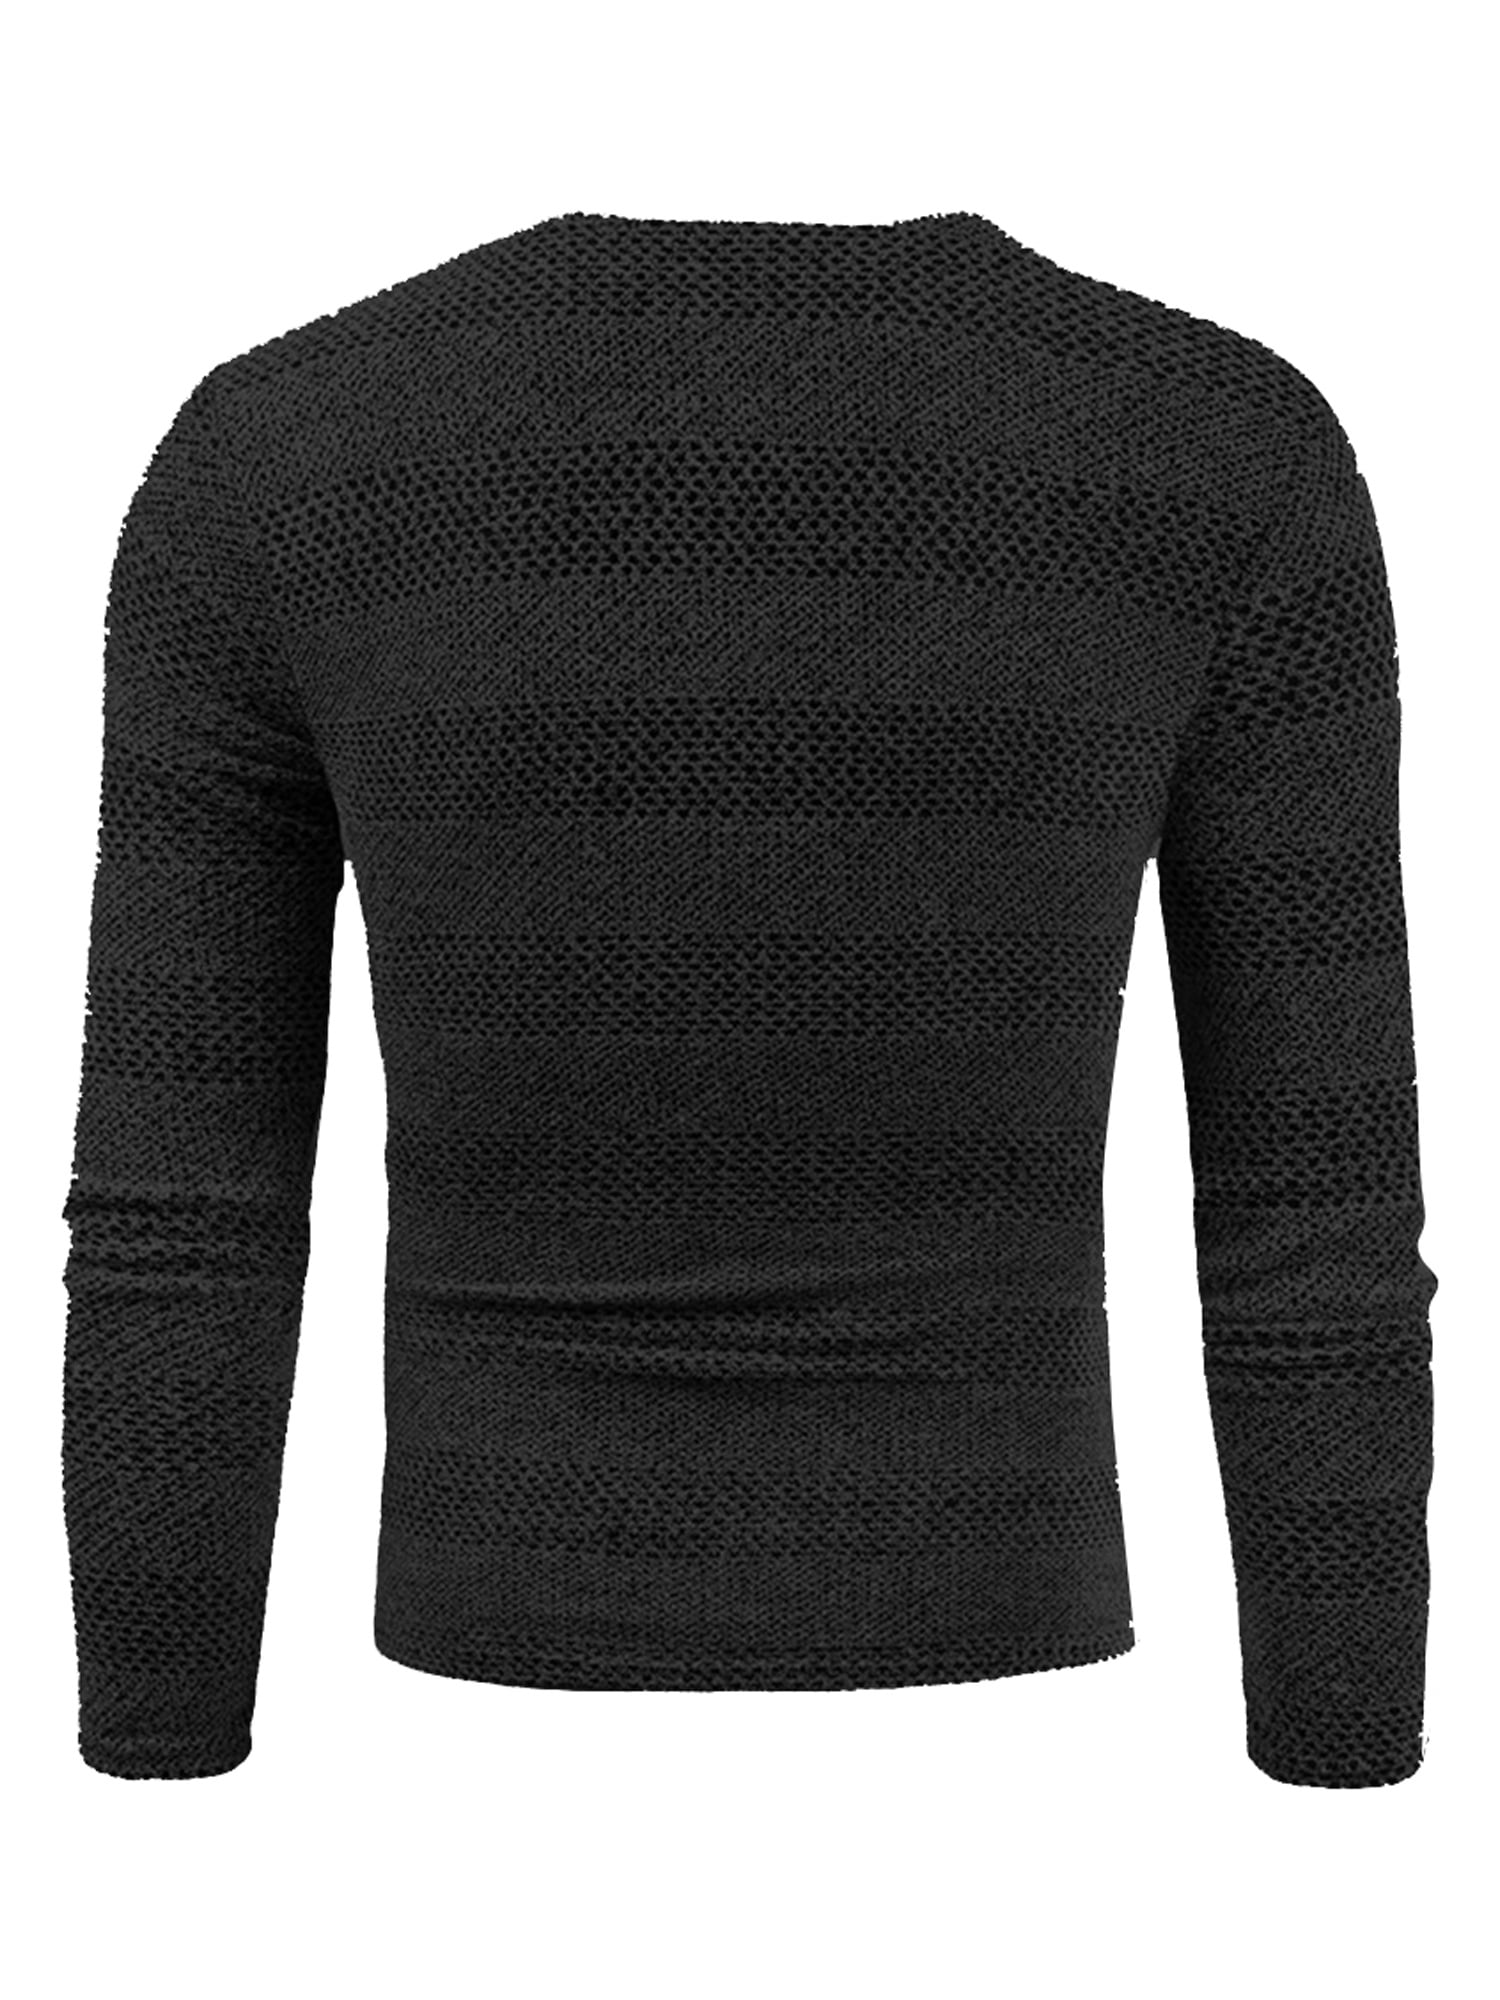 V-neck Warm Winter Knitted Top Fit Slim Mens Sleeve Casual Sweater Long Pullover